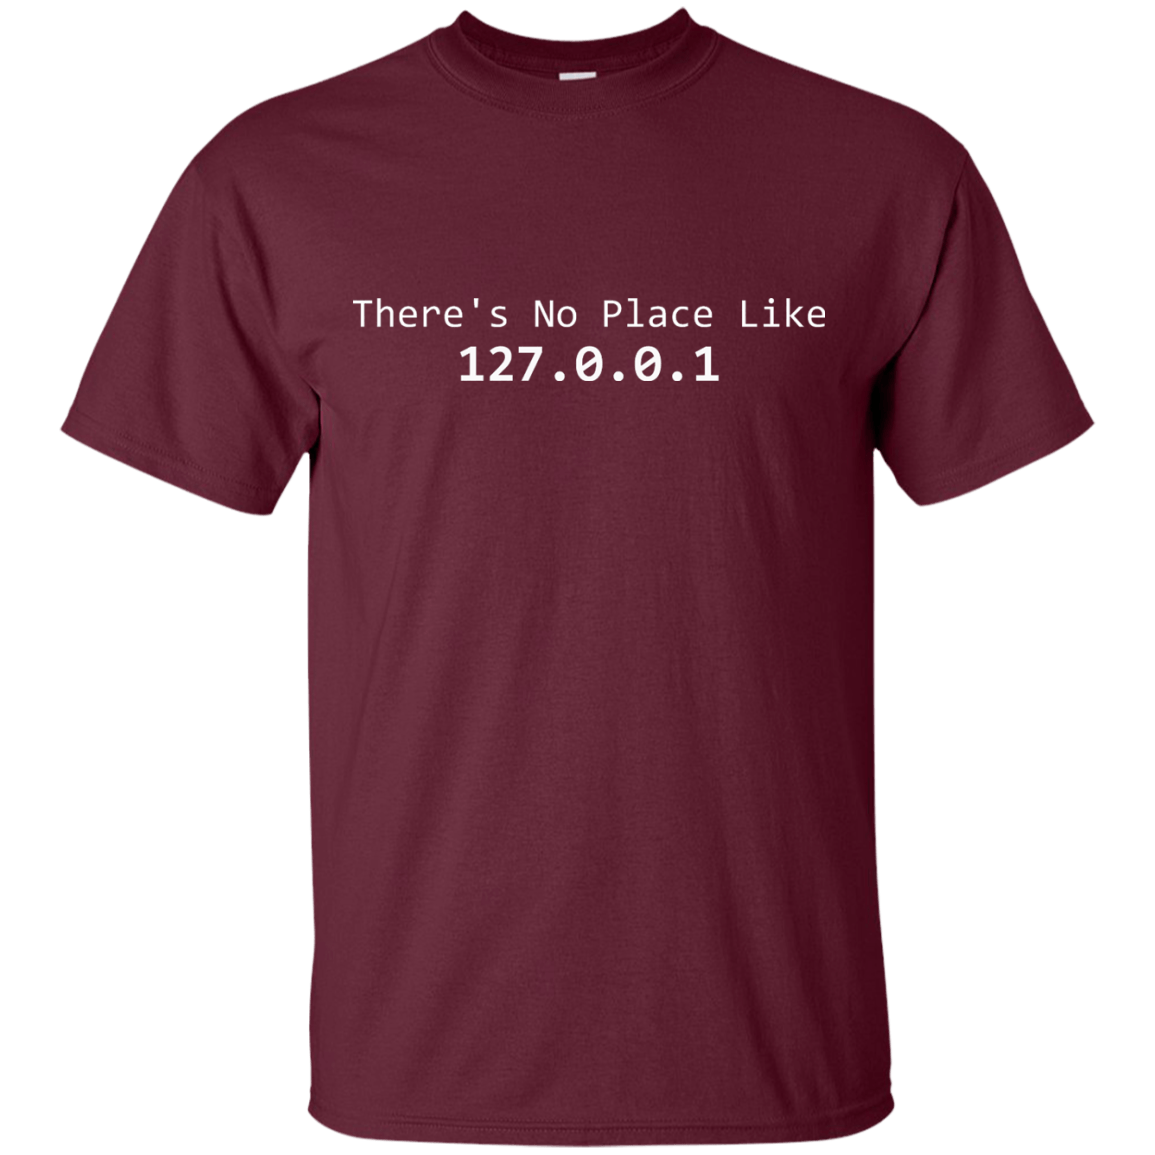 There's No Place Like 127.0.0.1 - Engineering Outfitters